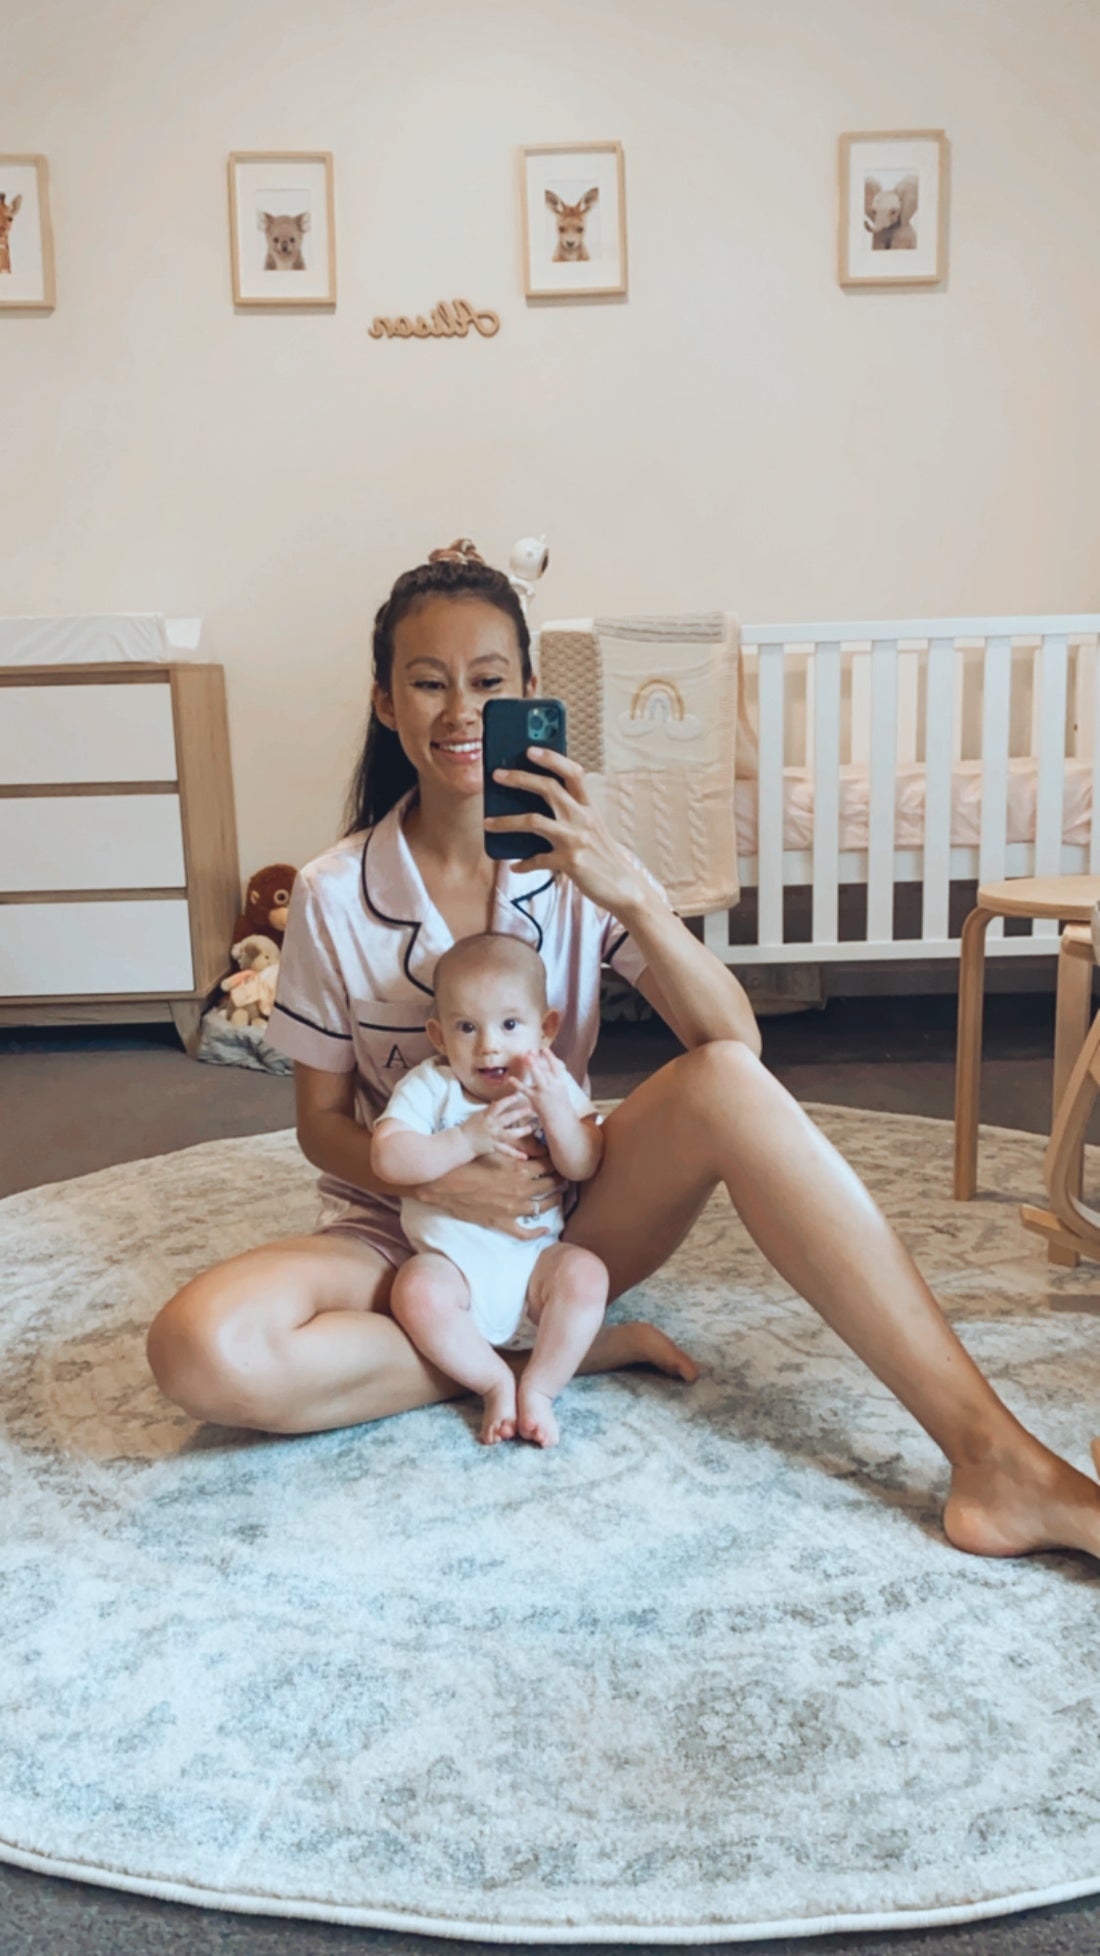 Life as a new mum - Amy, Owner of Sleepy Society